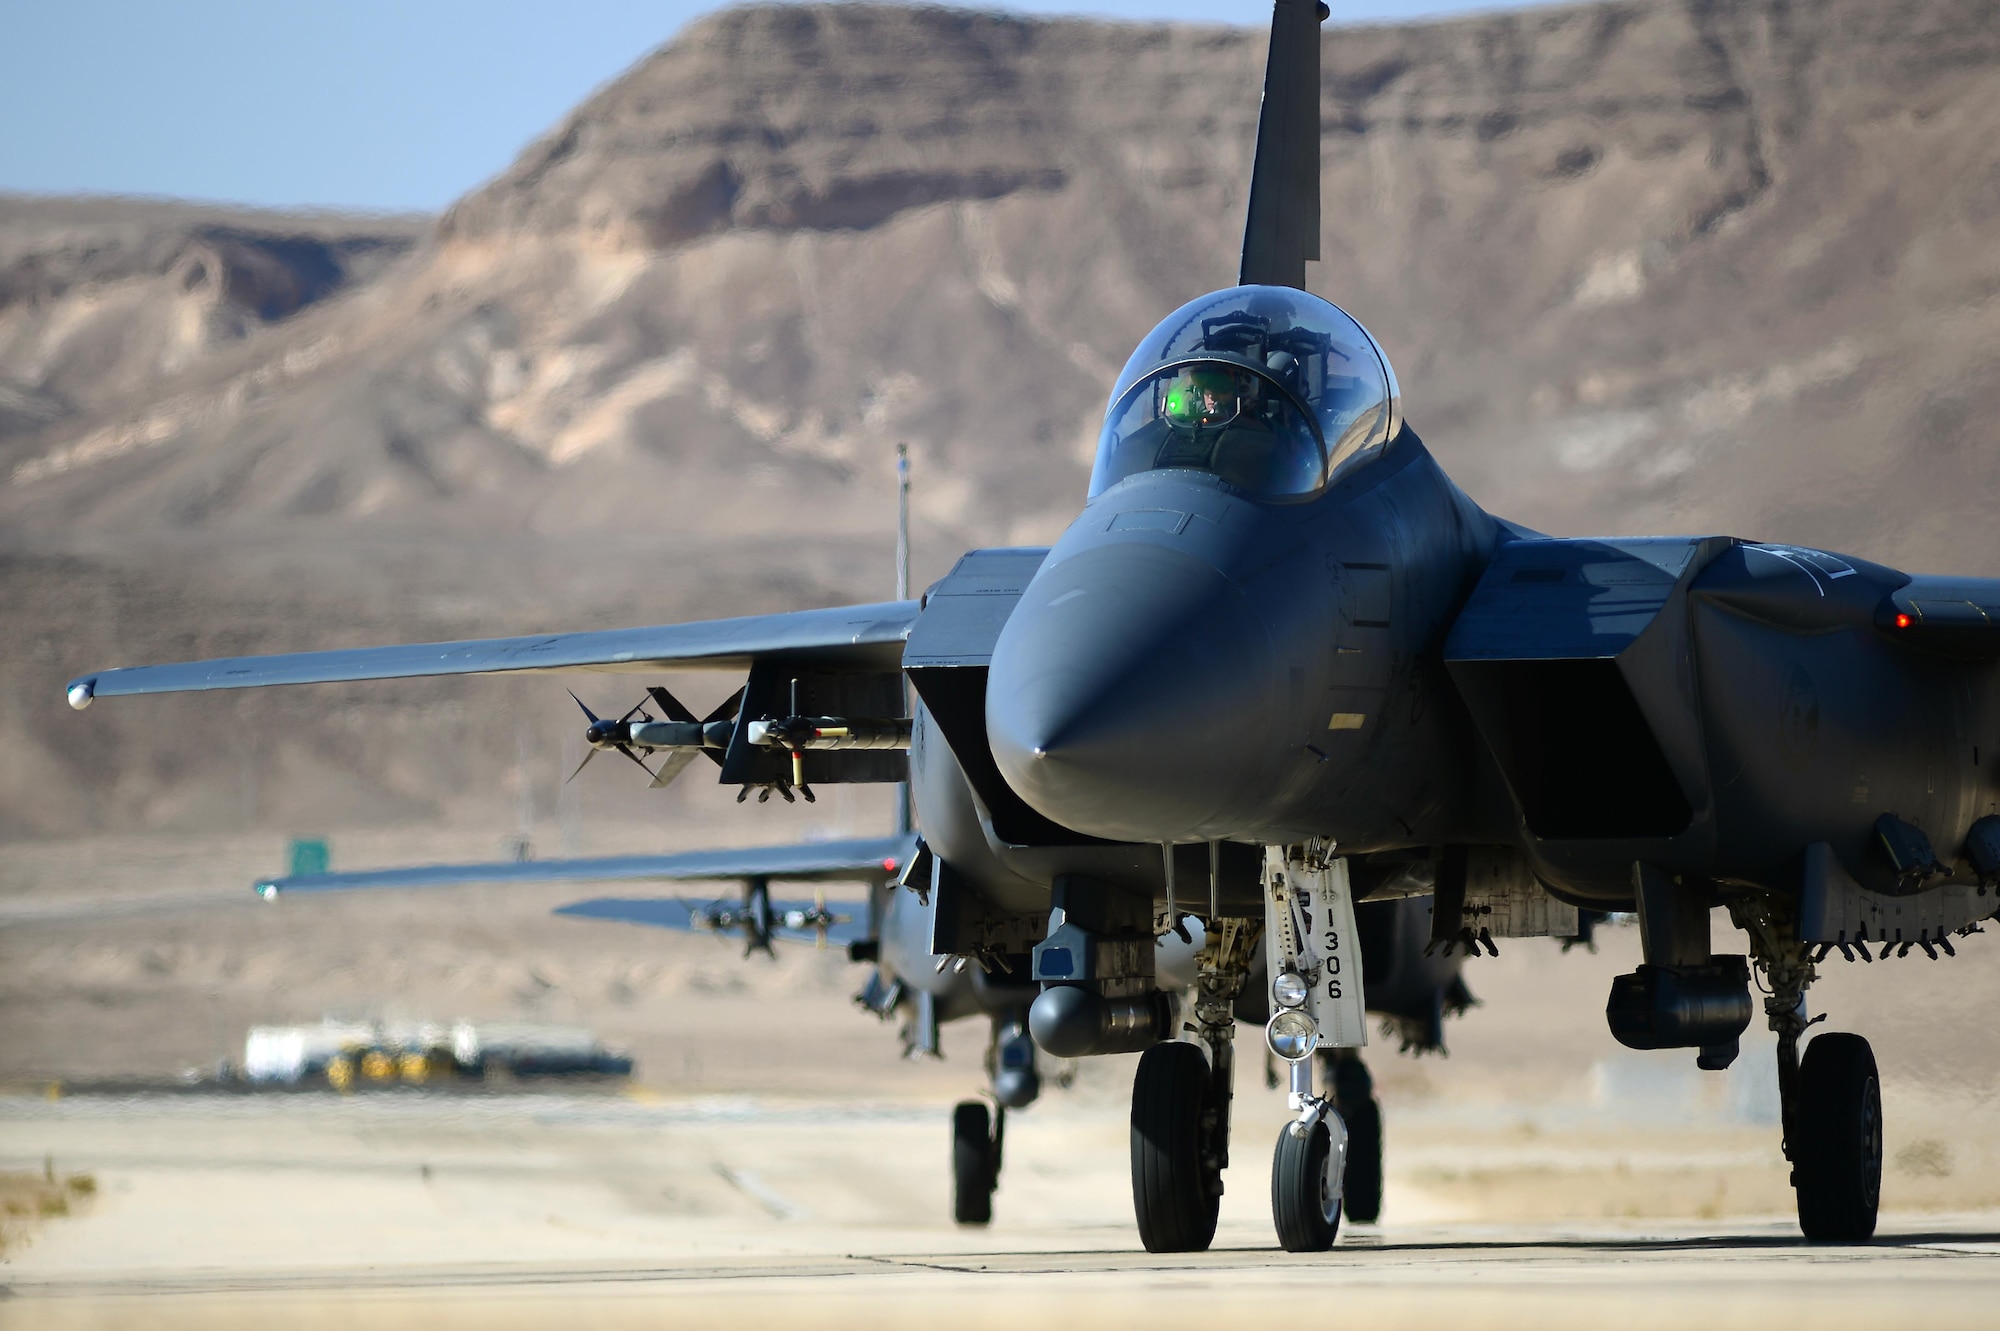 An F-15E Strike Eagle taxis to the maintenance area following a combat mission during the Blue Flag exercise Nov. 26, 2013, on Uvda Air Force Base, Israel.  Aircraft from the 492nd Fighter Squadron, Royal Air Force Lakenheath, England deployed to participate in the exercise, which promoted improved operational capability, combat effectiveness, understanding and cooperation between the U.S., Israel, Greece, and Italy. (U.S. Air Force photo/Master Sgt. Lee Osberry)